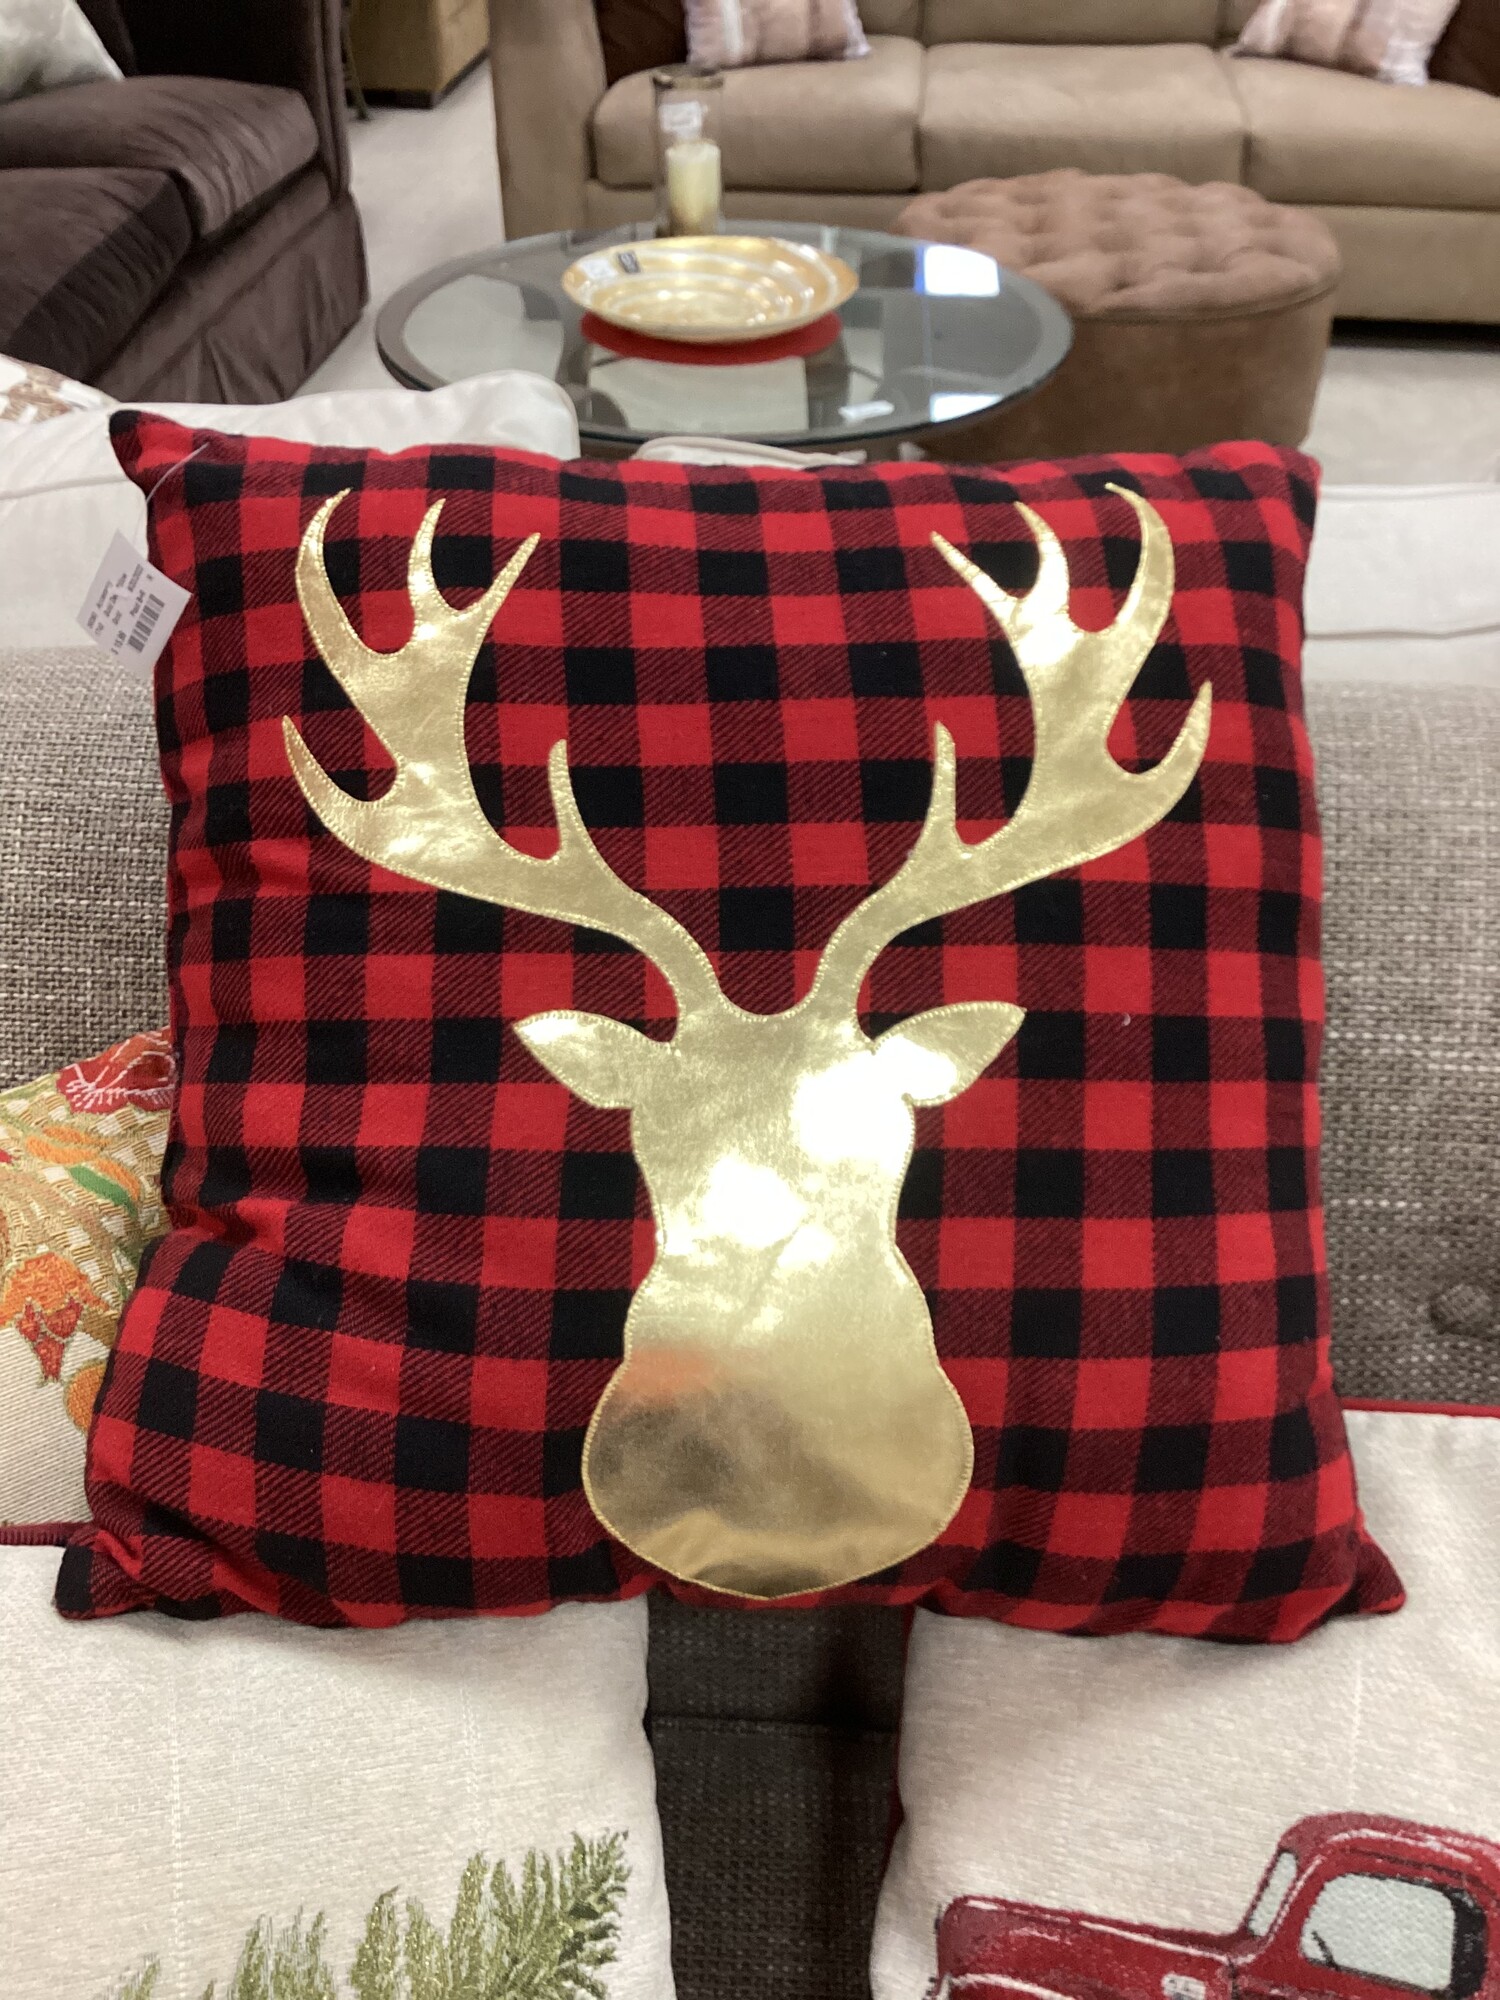 Gold Deer Pillow, Gold, Plaid B+R
18 In x 18 In